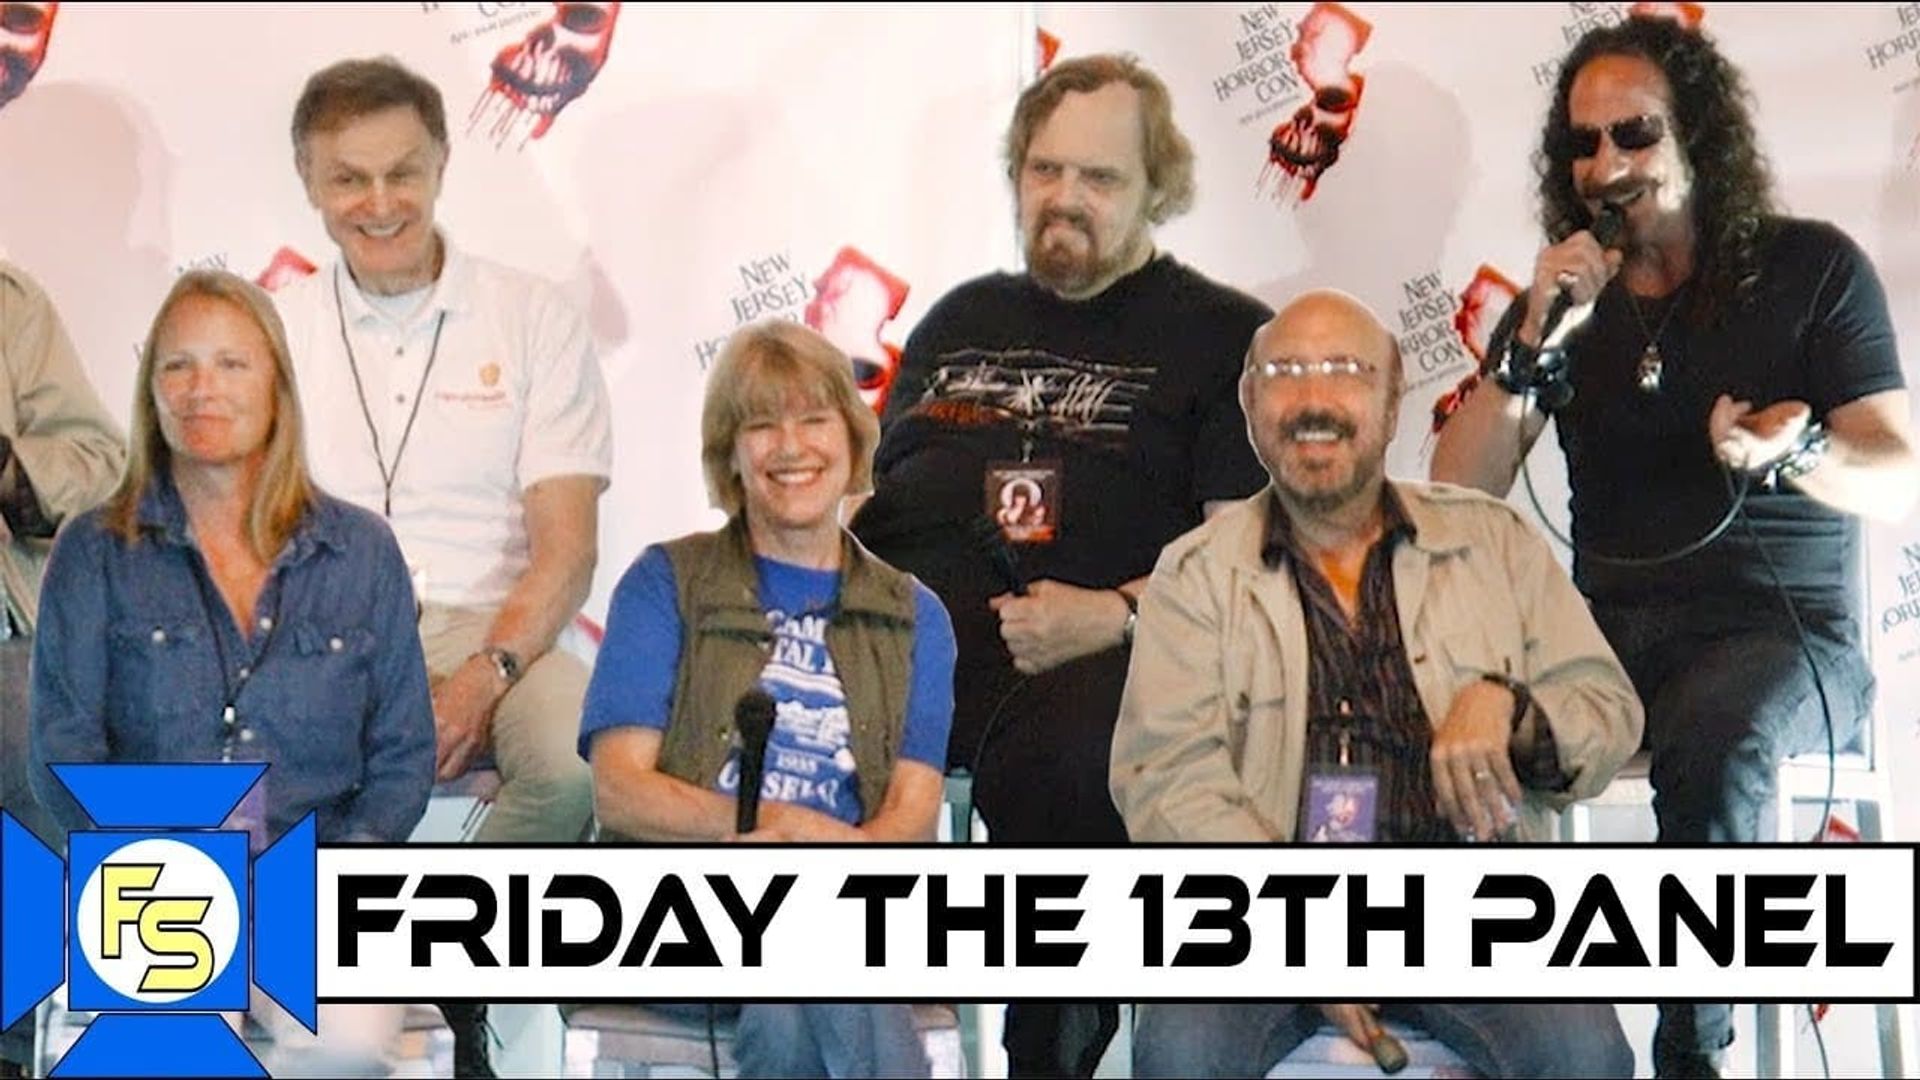 A Friday the 13th Reunion background